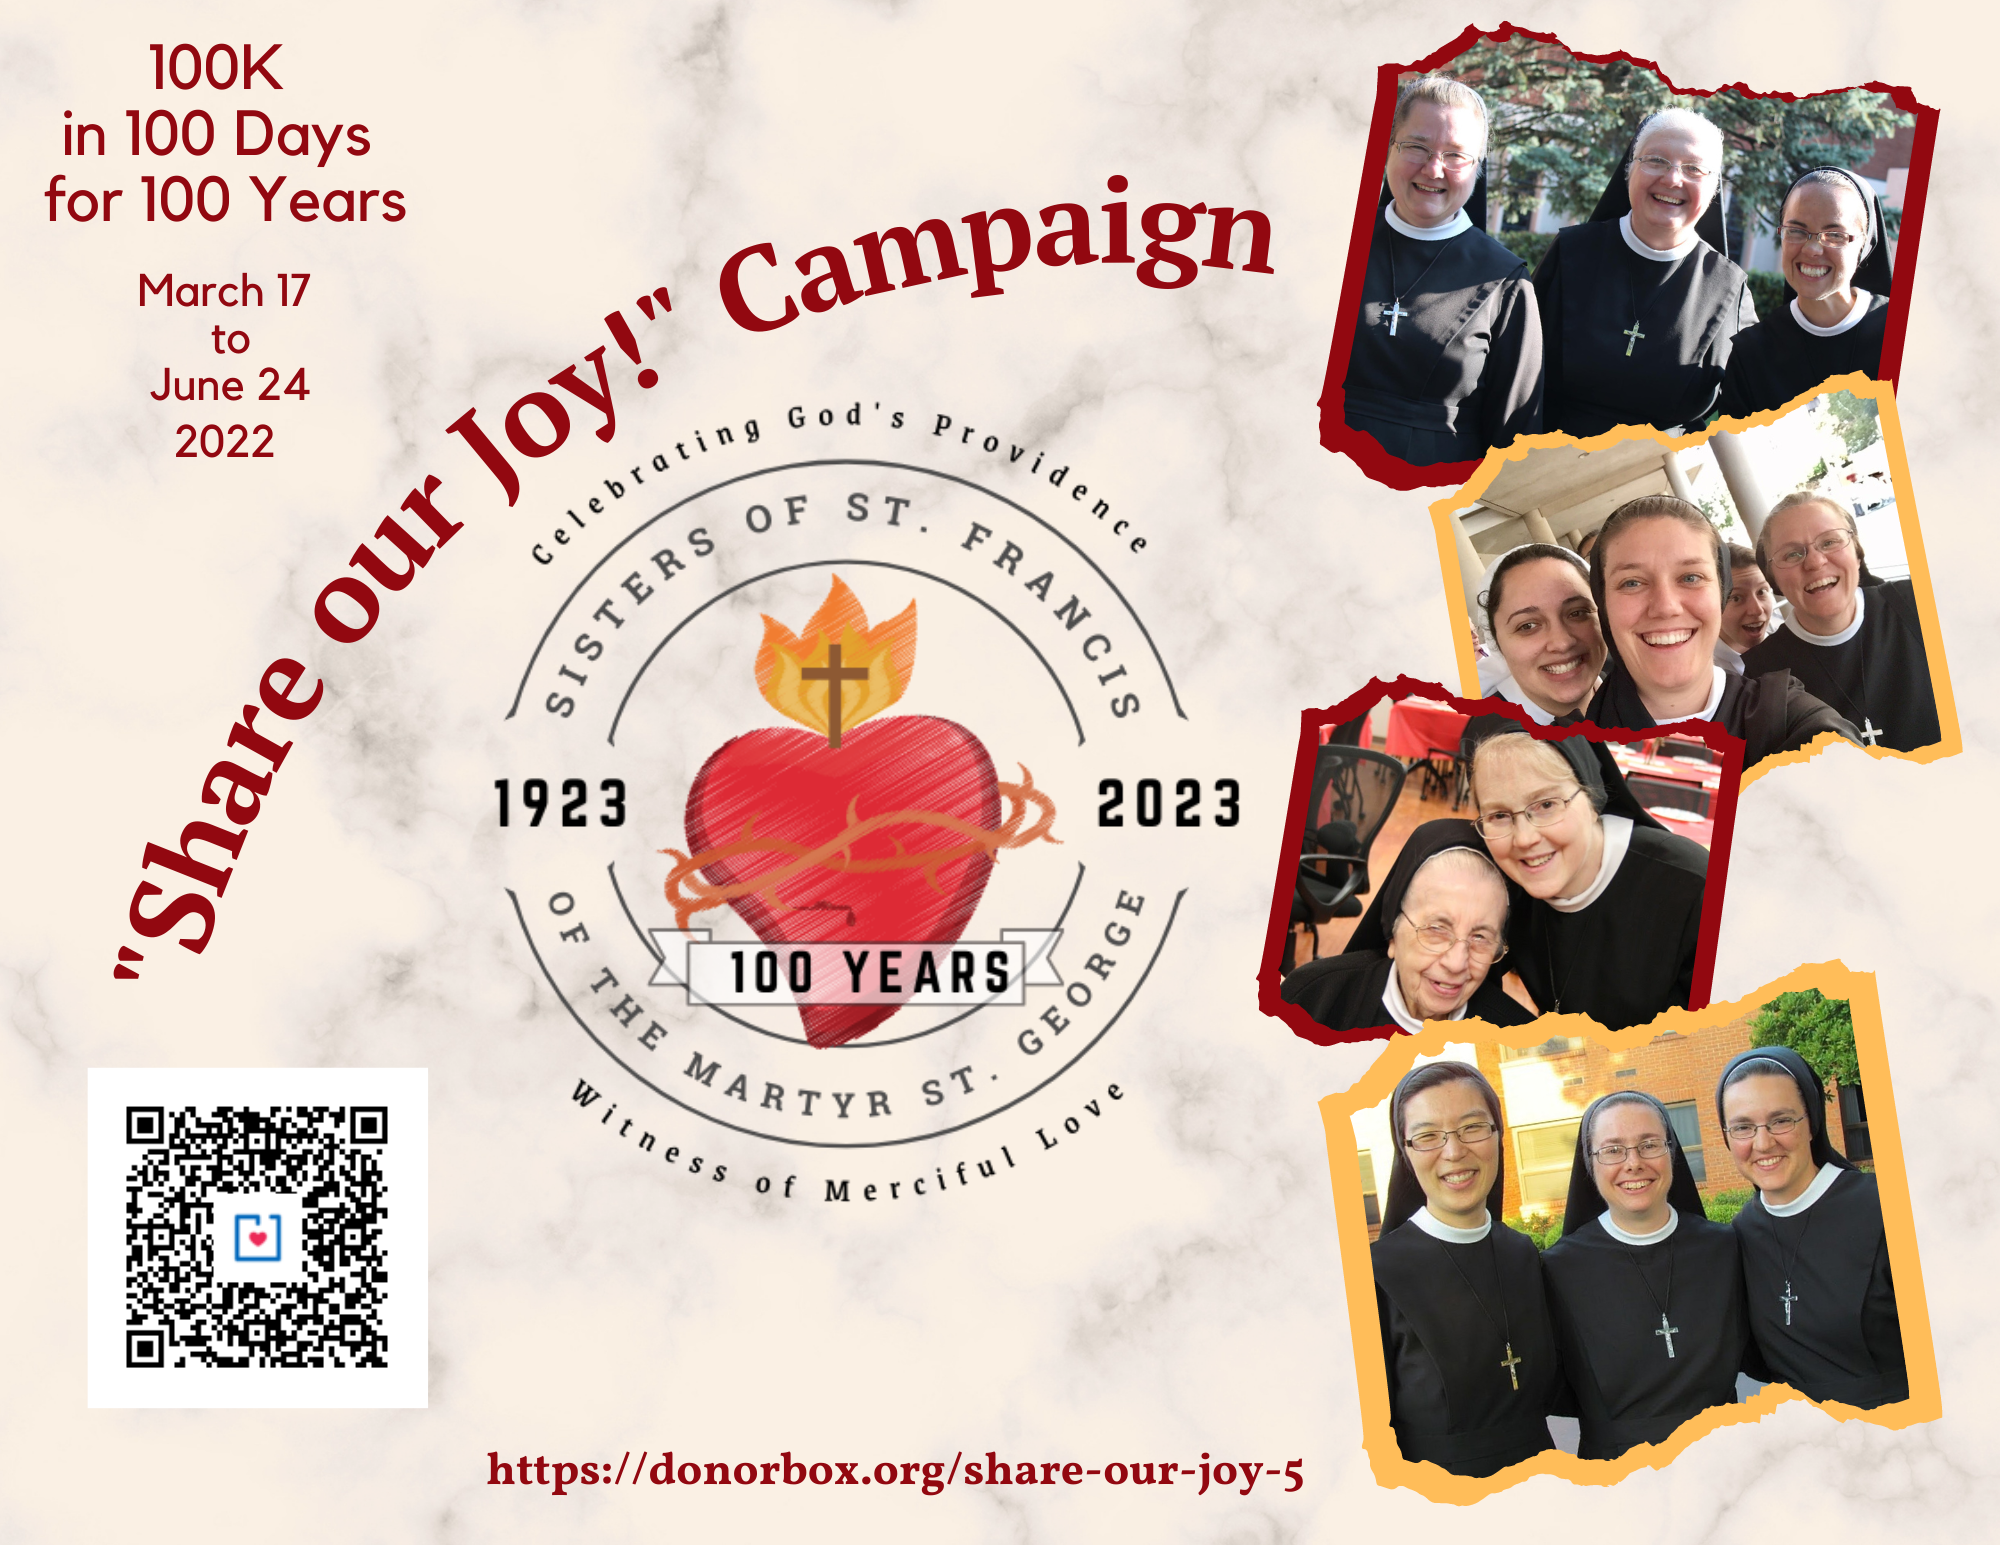 Share Our Joy Campaign